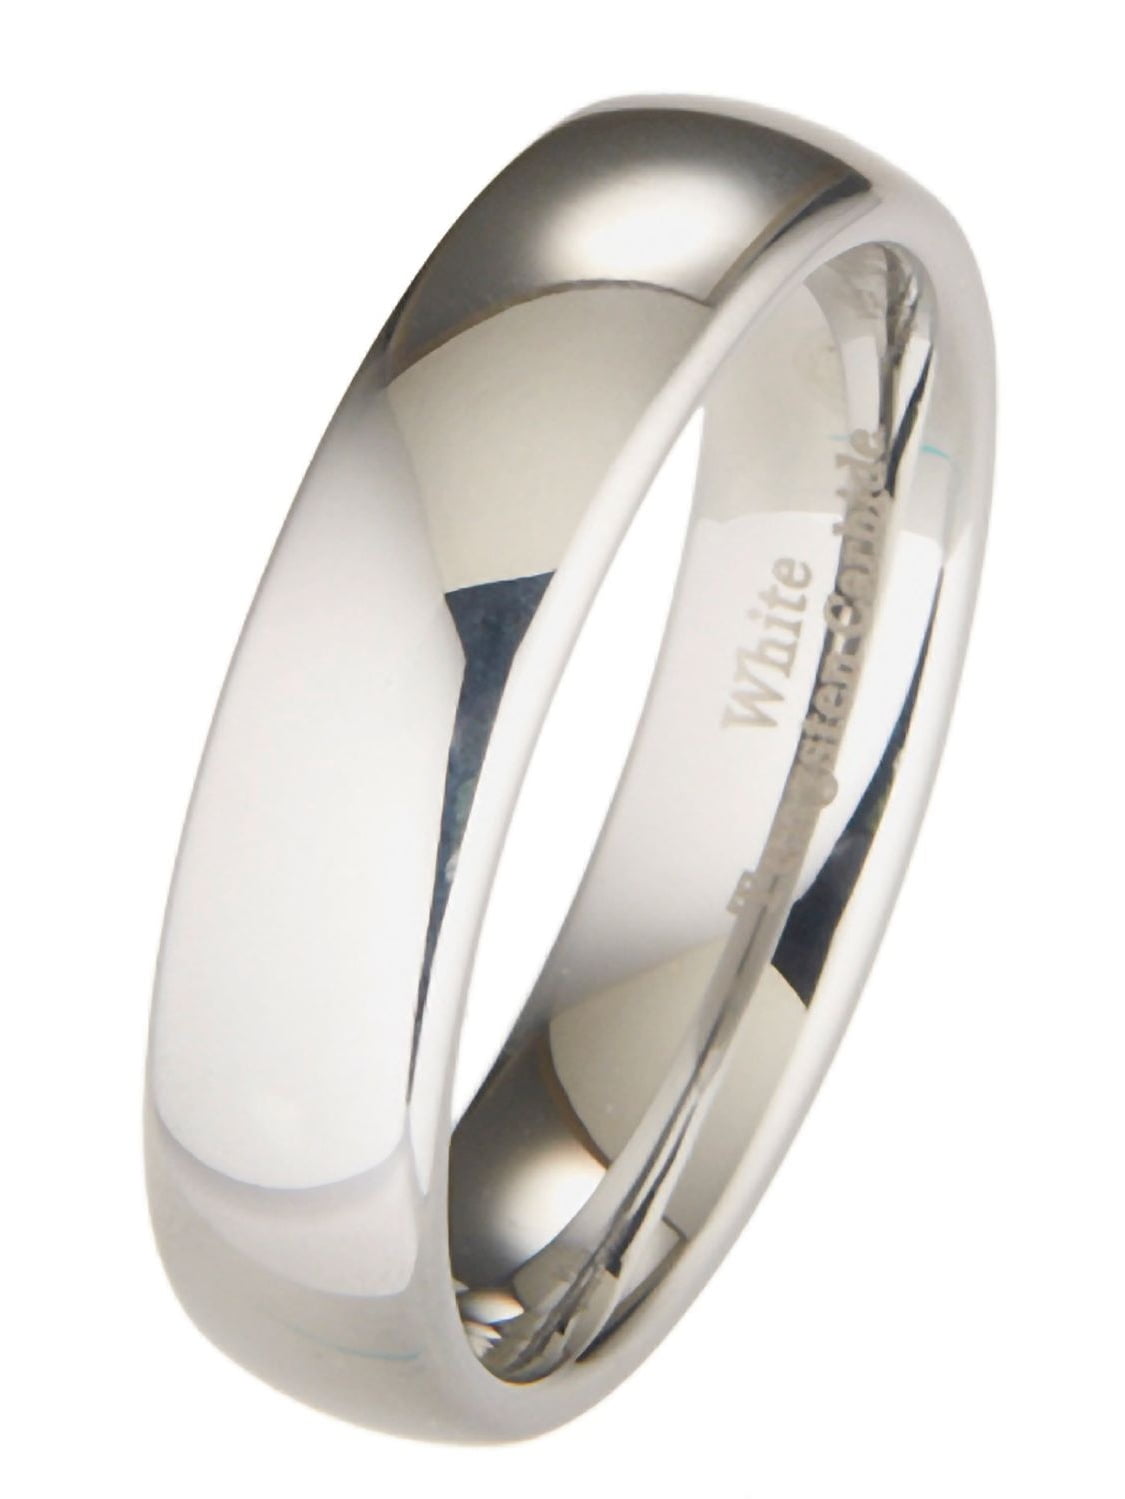 Elephant Spinner Eternity Wedding Ring New .925 Sterling Silver Band Sizes 4-14